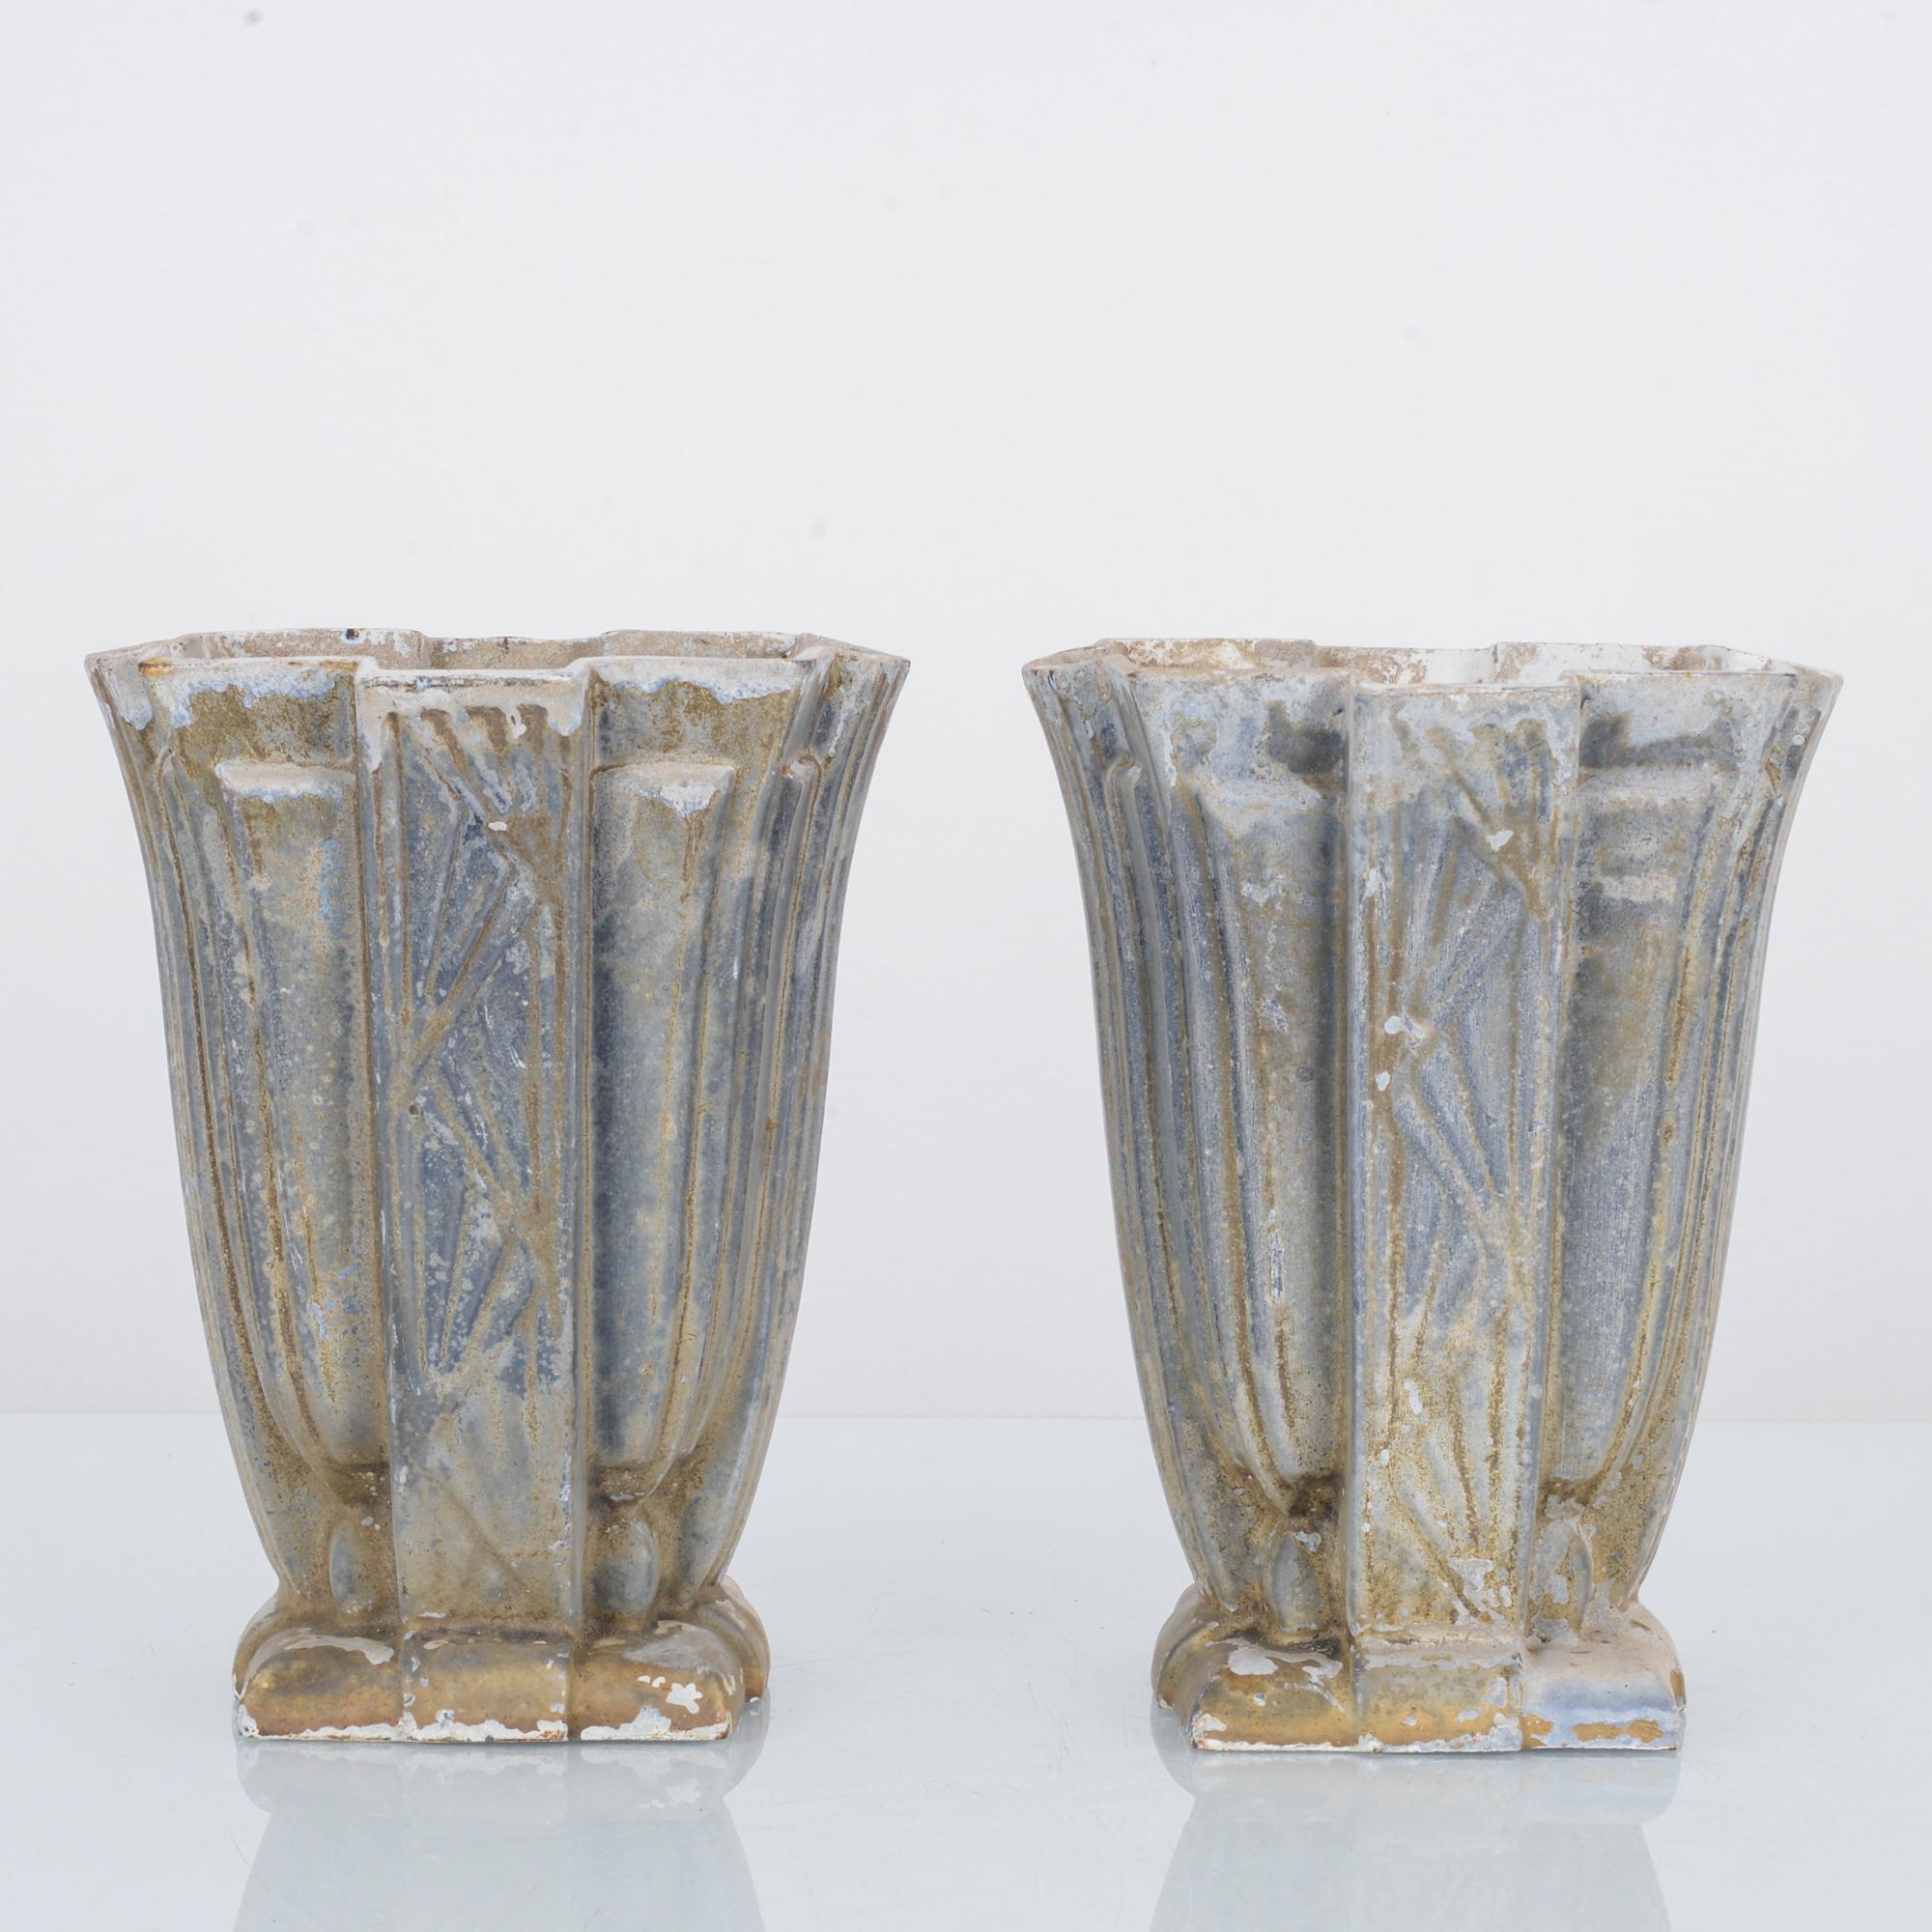 A pair of patinated cast iron planters hailing from France, circa 1900. With their proto-Art Deco design, they look like inspiration for the Chrysler building,-while their own design is naturally inspired in the wild daffodil.